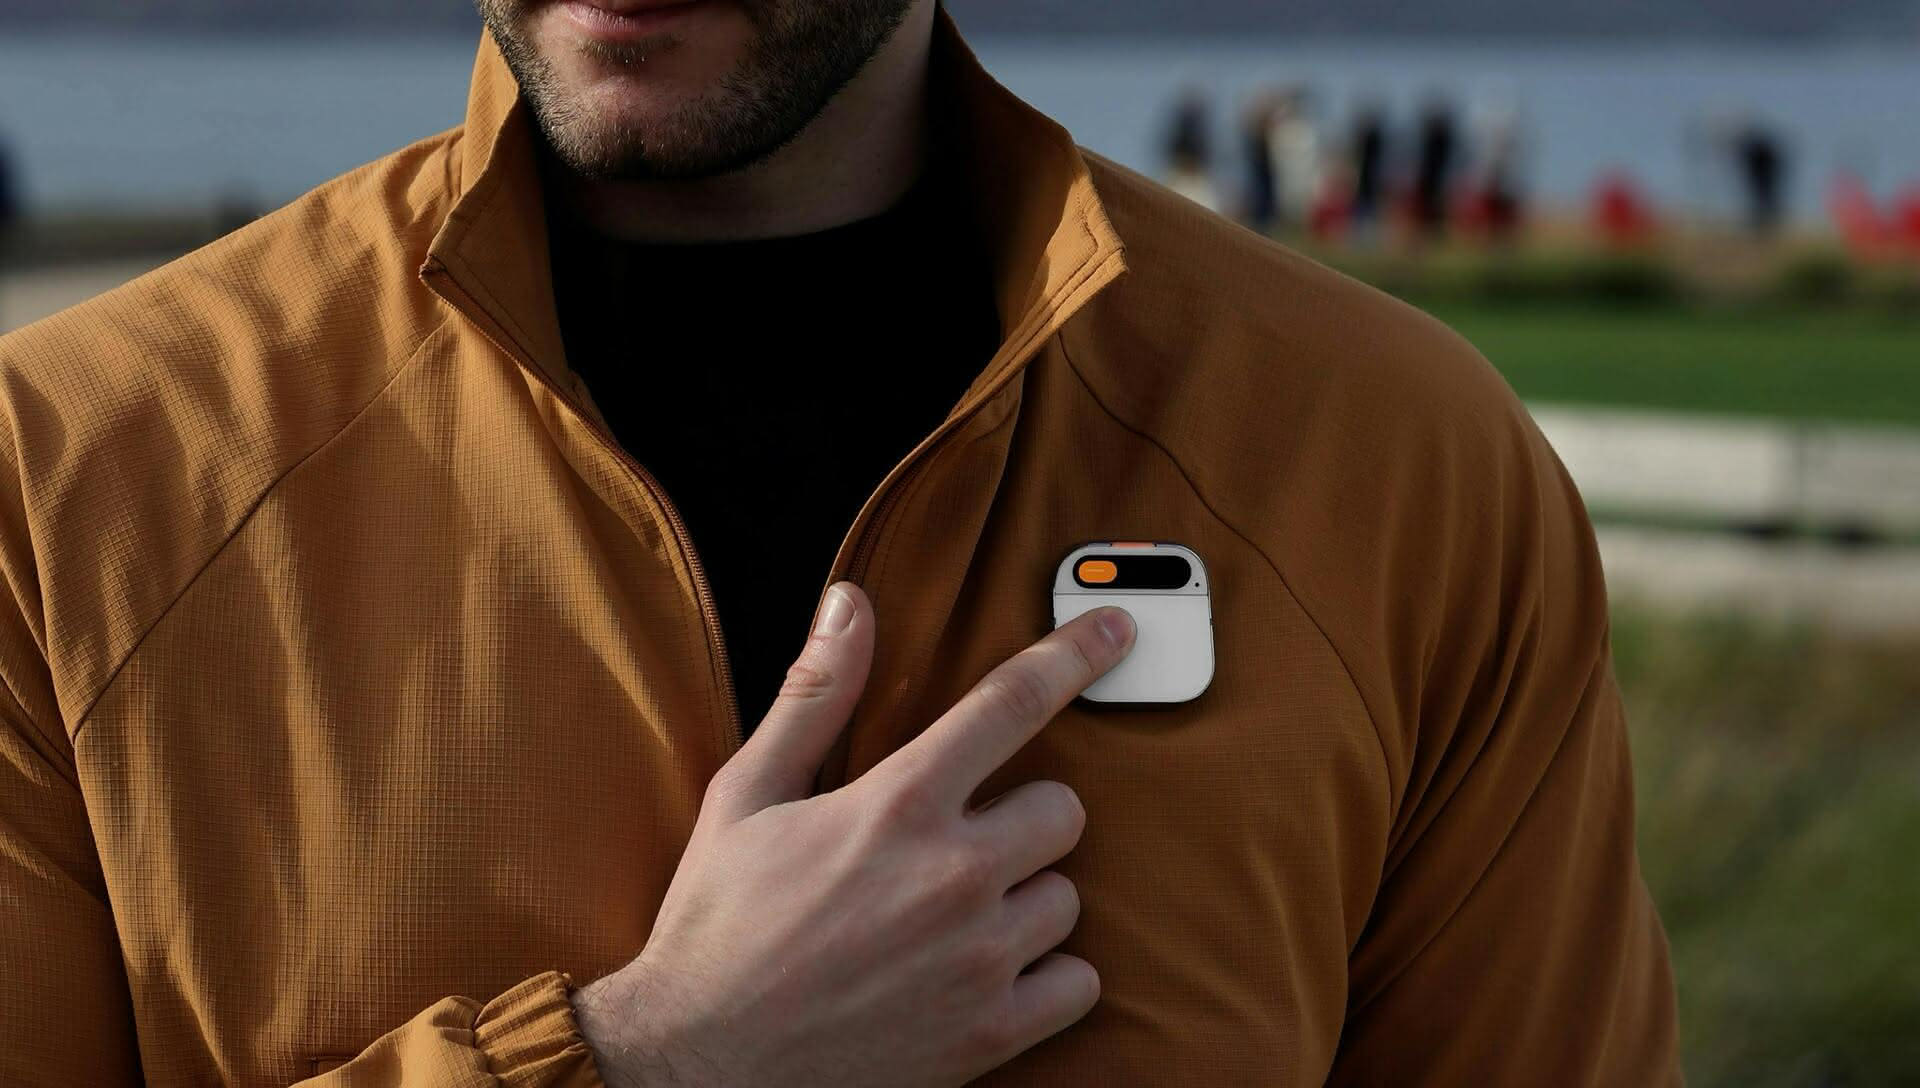 Humane AI Pin being worn by a man in a brown jacket